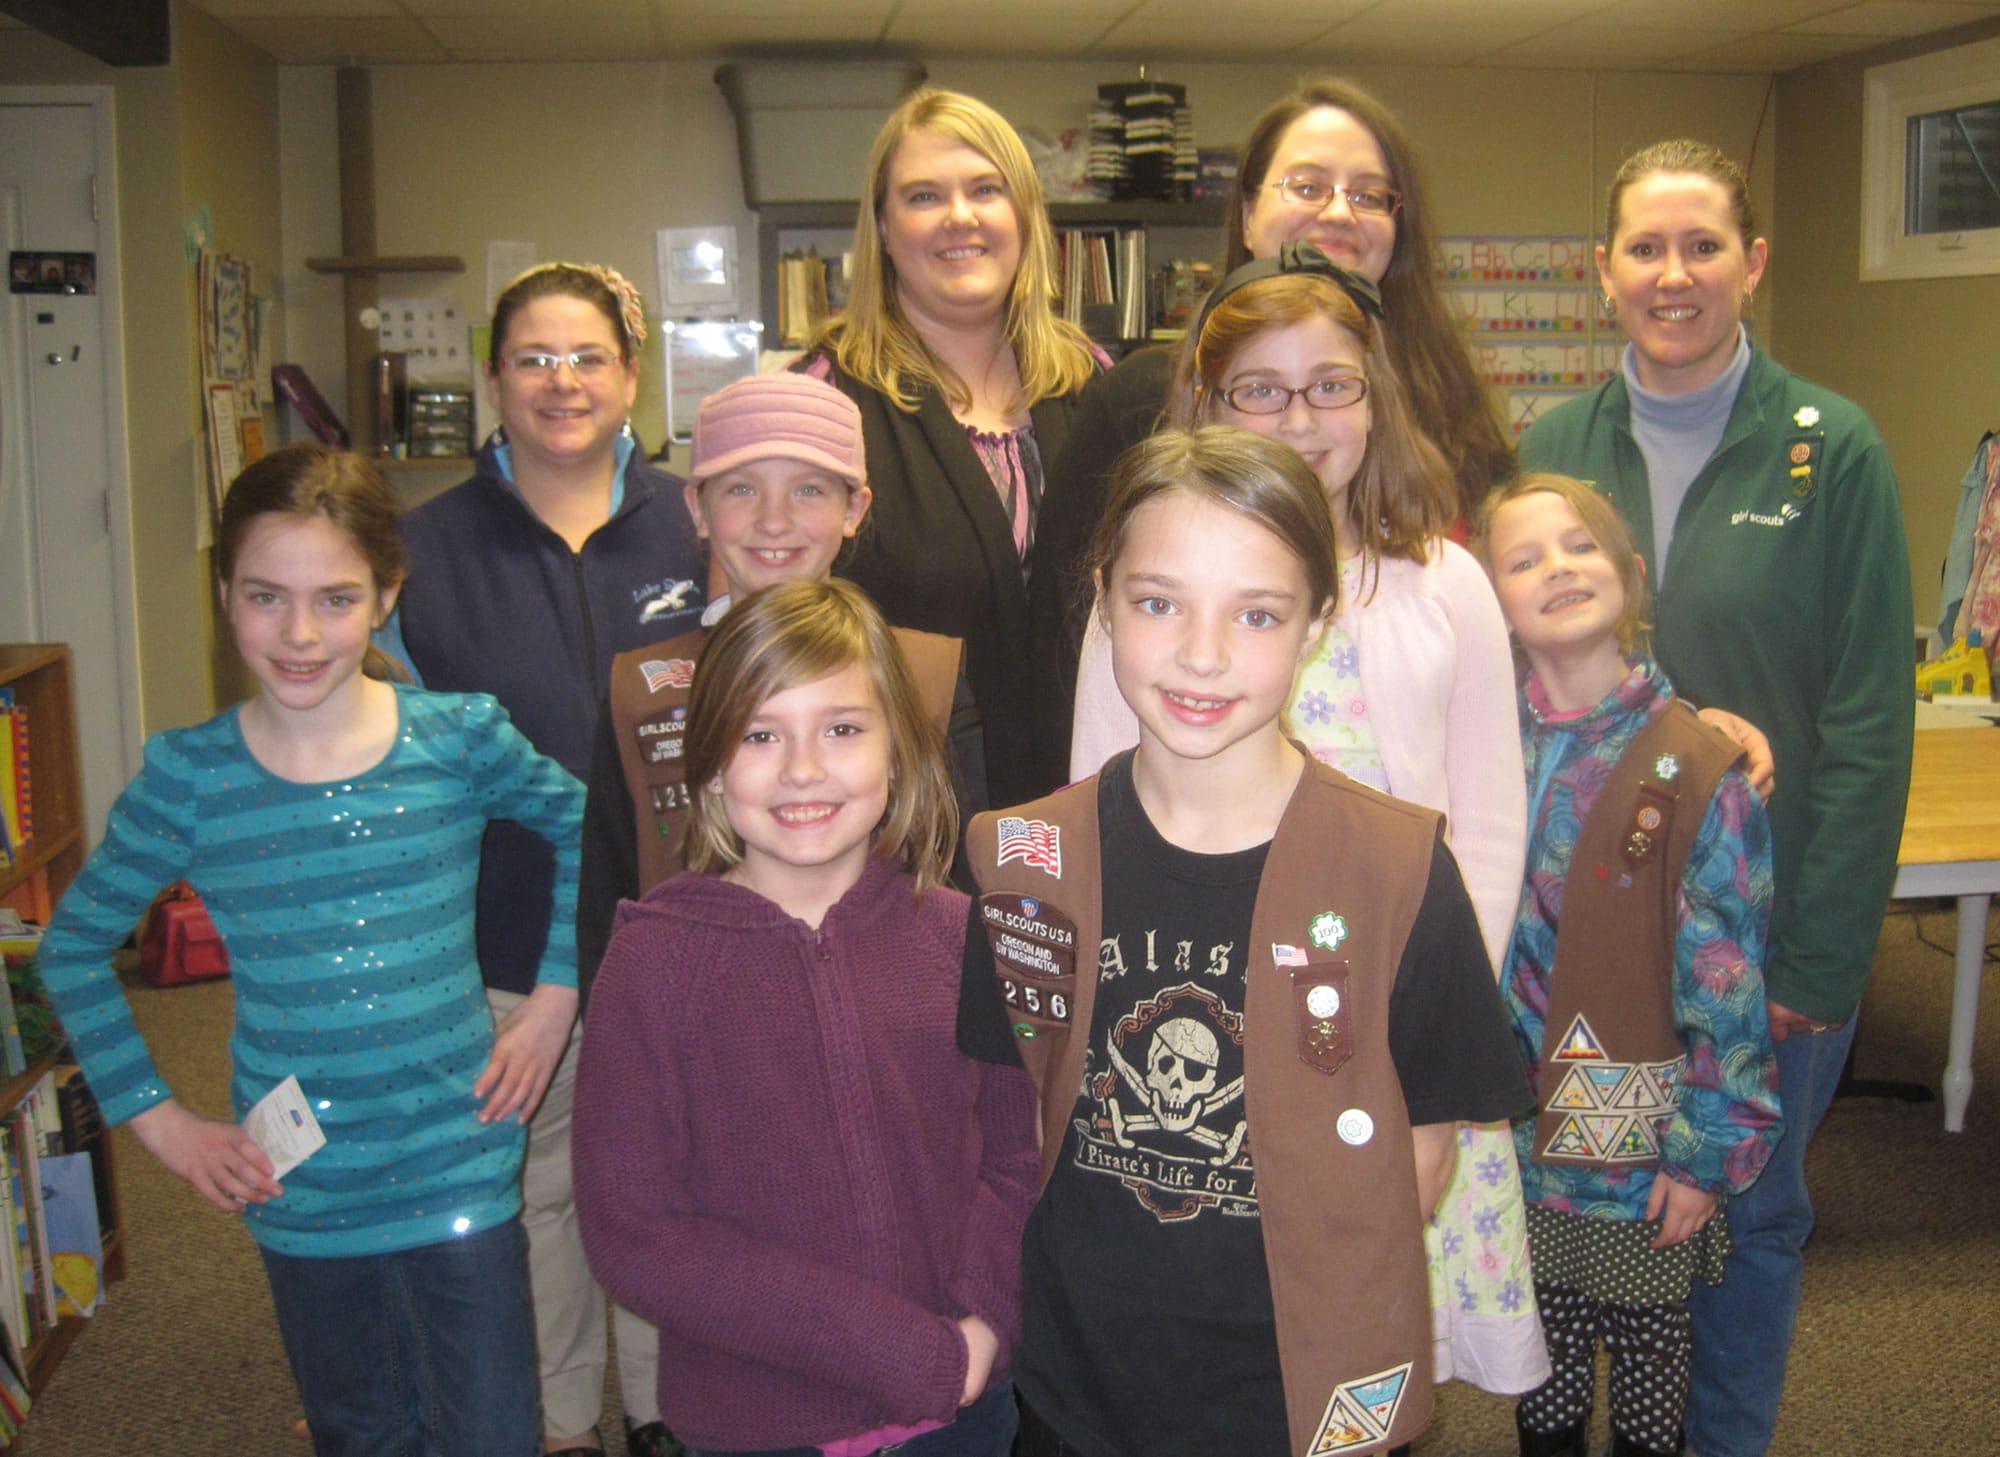 West Hazel Dell: Girl Scout Brownie Troop 42561 donated $263 to the American Cancer Society in honor of the late Megan Gianotti.